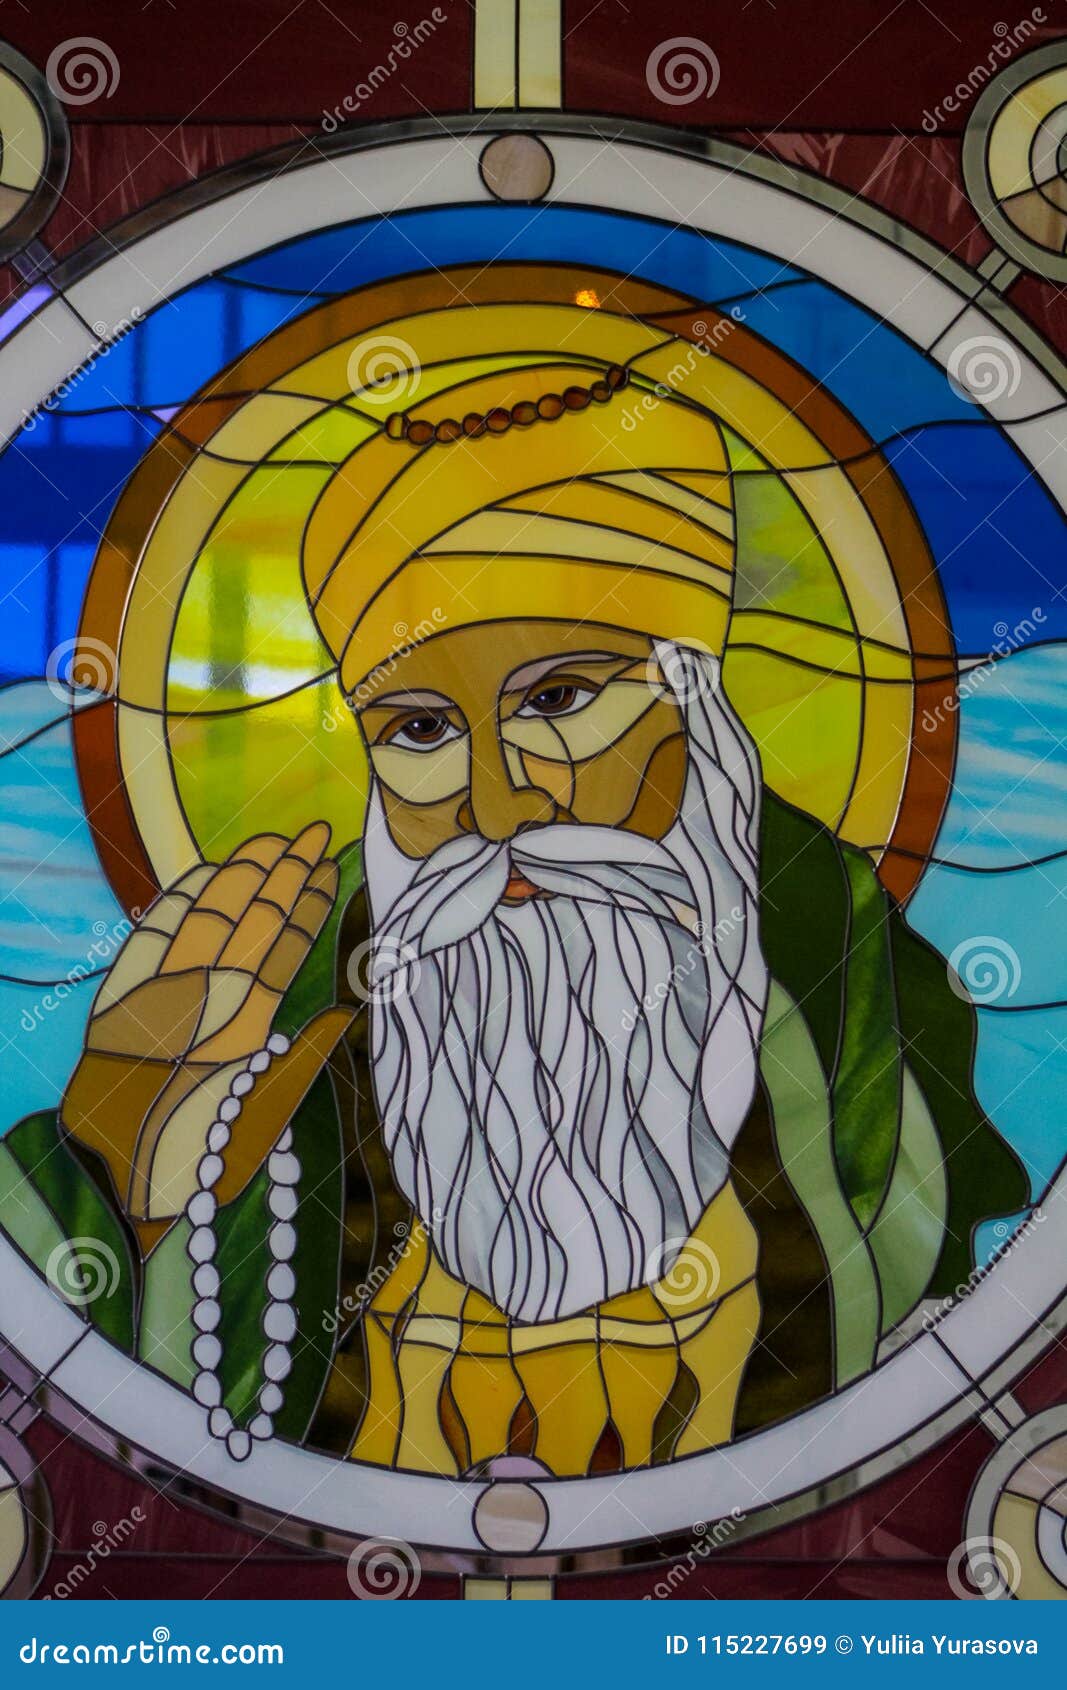 sikh guru portrait on stained glass in the sikh temple